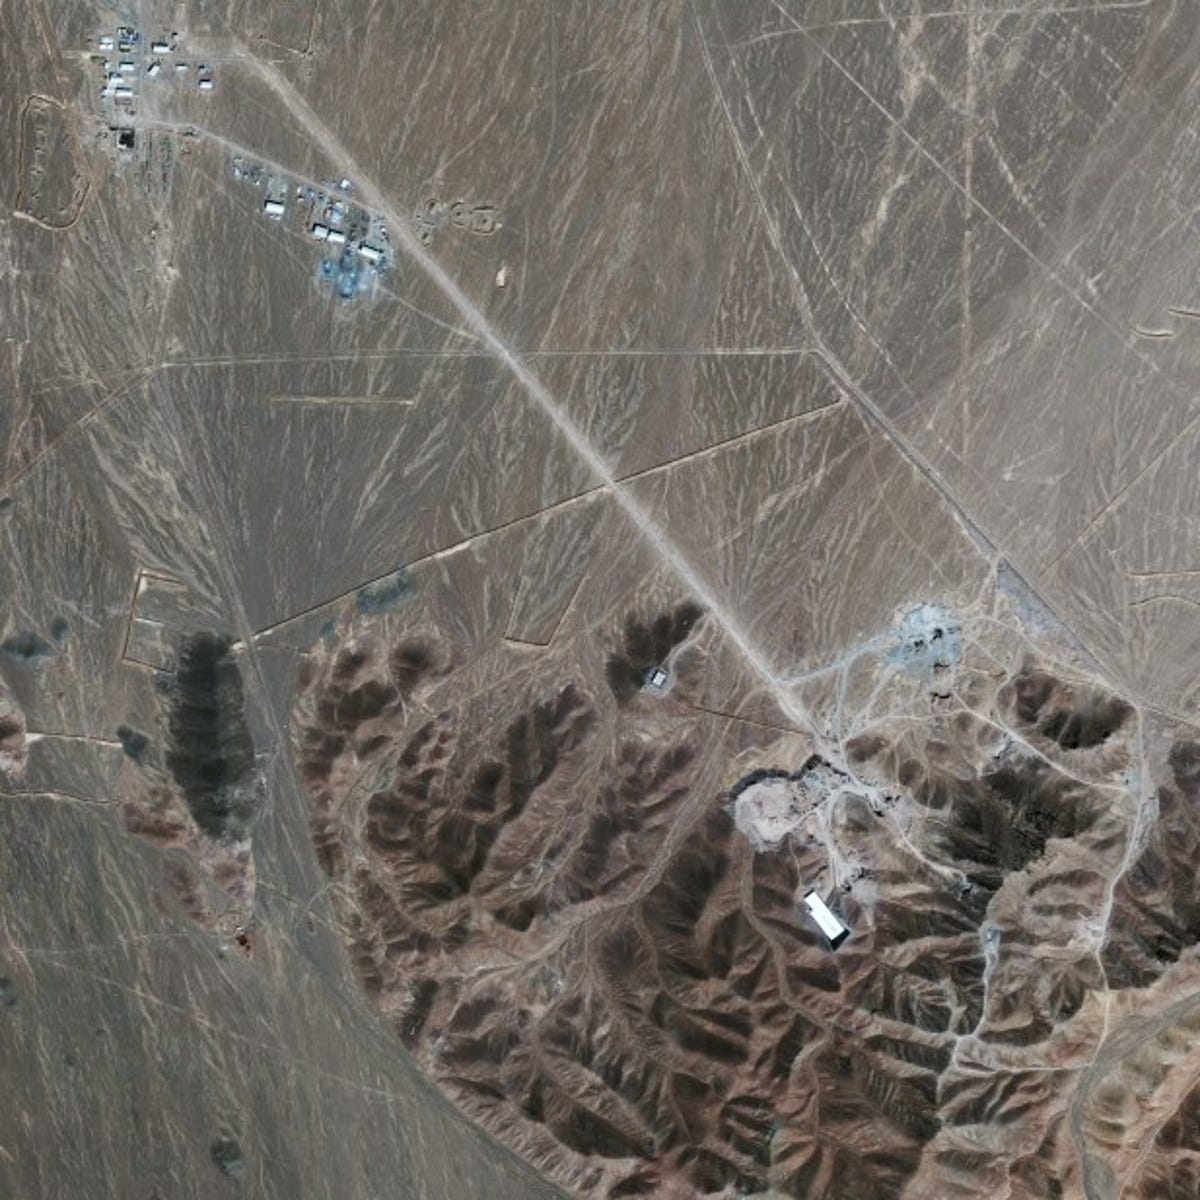 The overall view of the Iranian site. The mountain under which the site is built is to the lower right of the image.